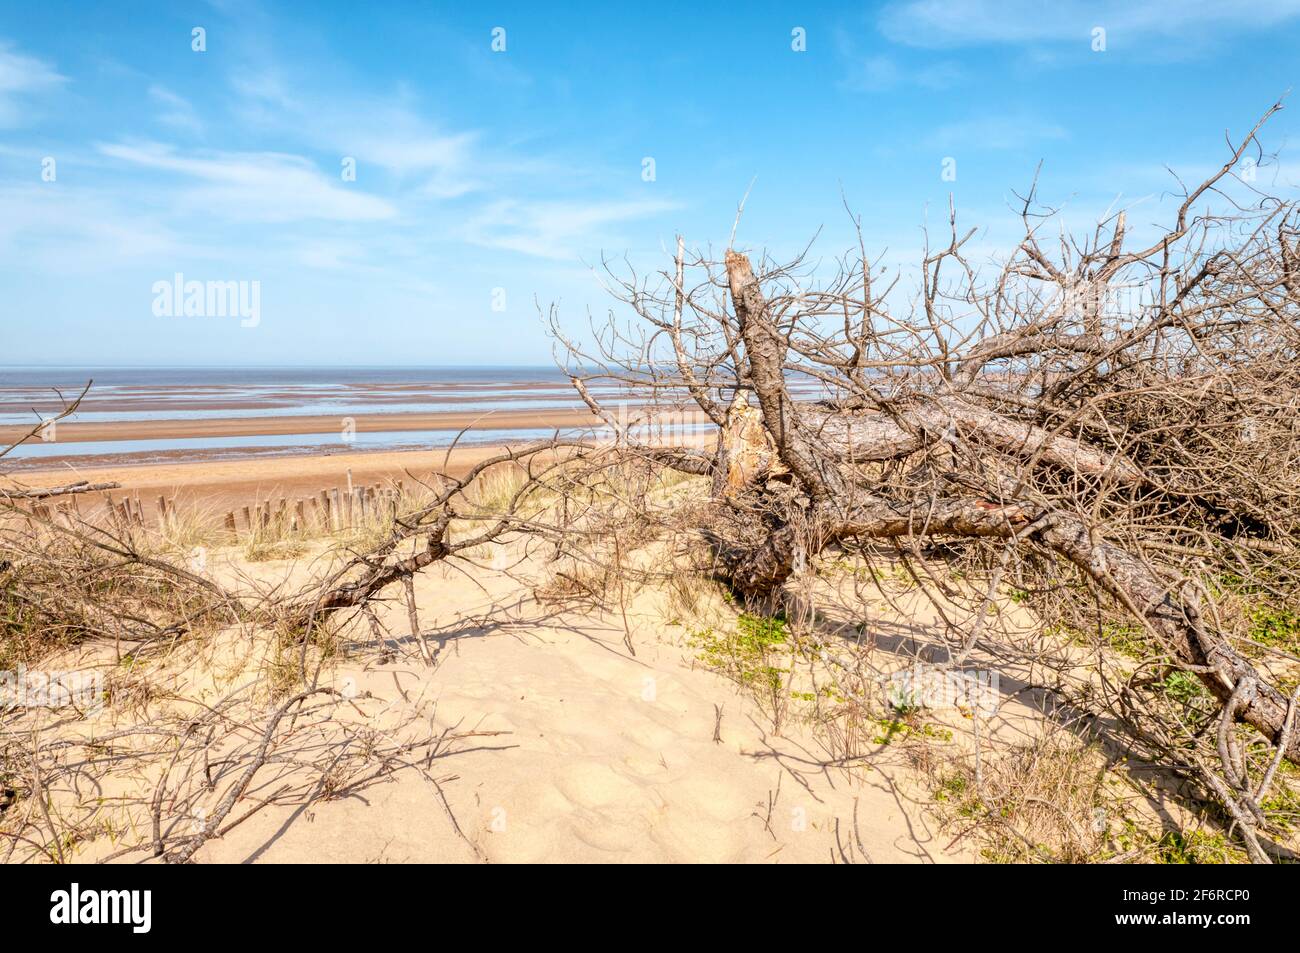 Dead trees on dunes behind an empty beach at Holme Dunes nature reserve, North Norfolk. Stock Photo